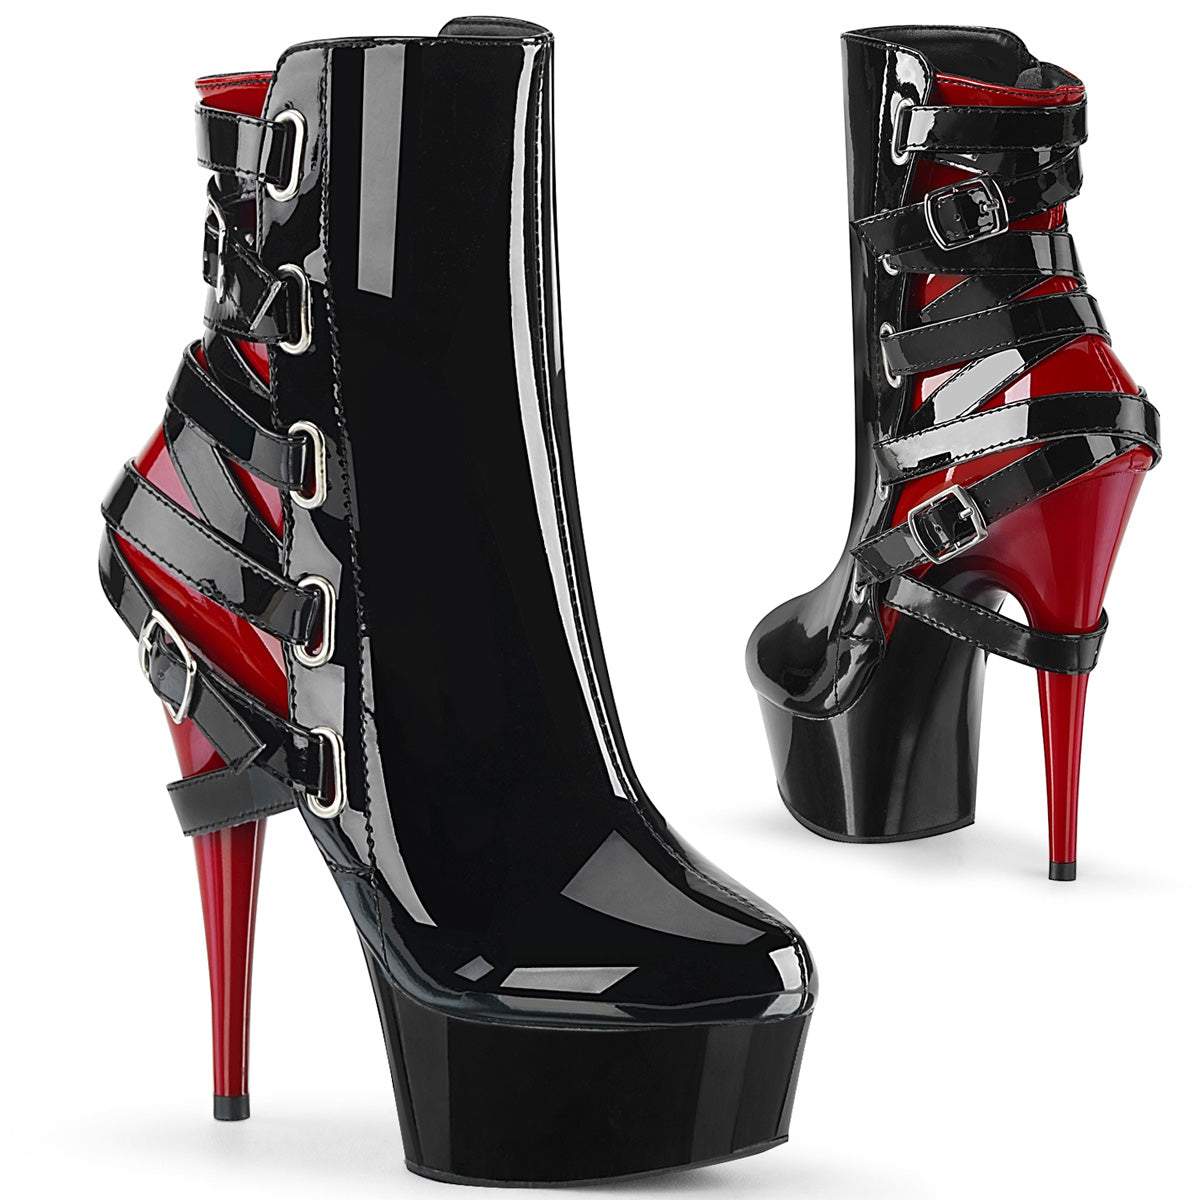 DELIGHT-1012 Black Red Ankle Boots